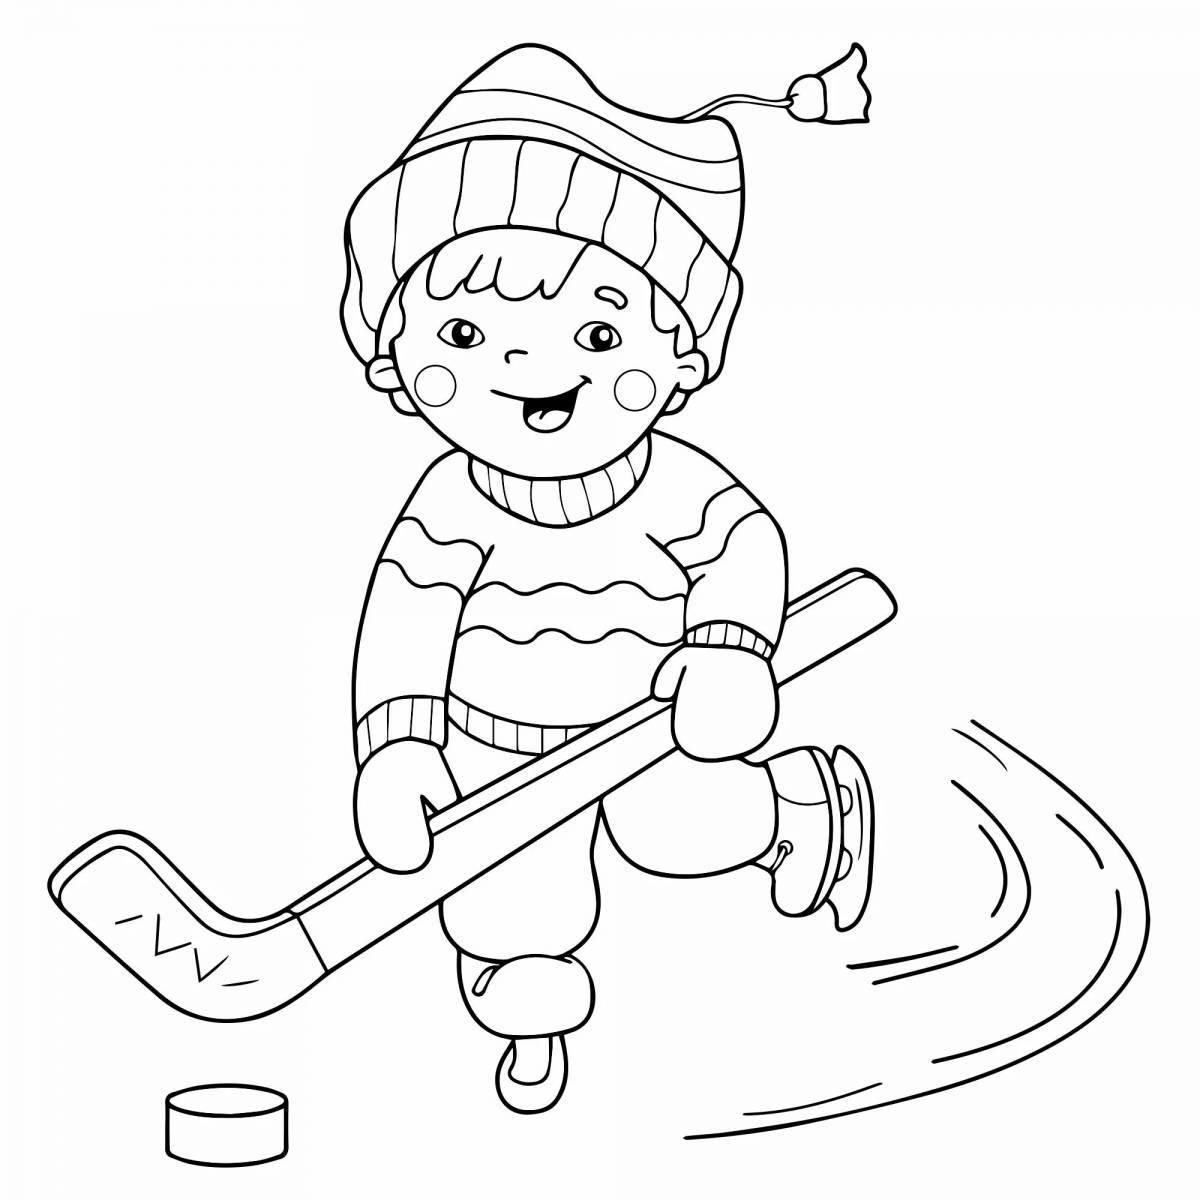 Great beginner winter sports coloring book